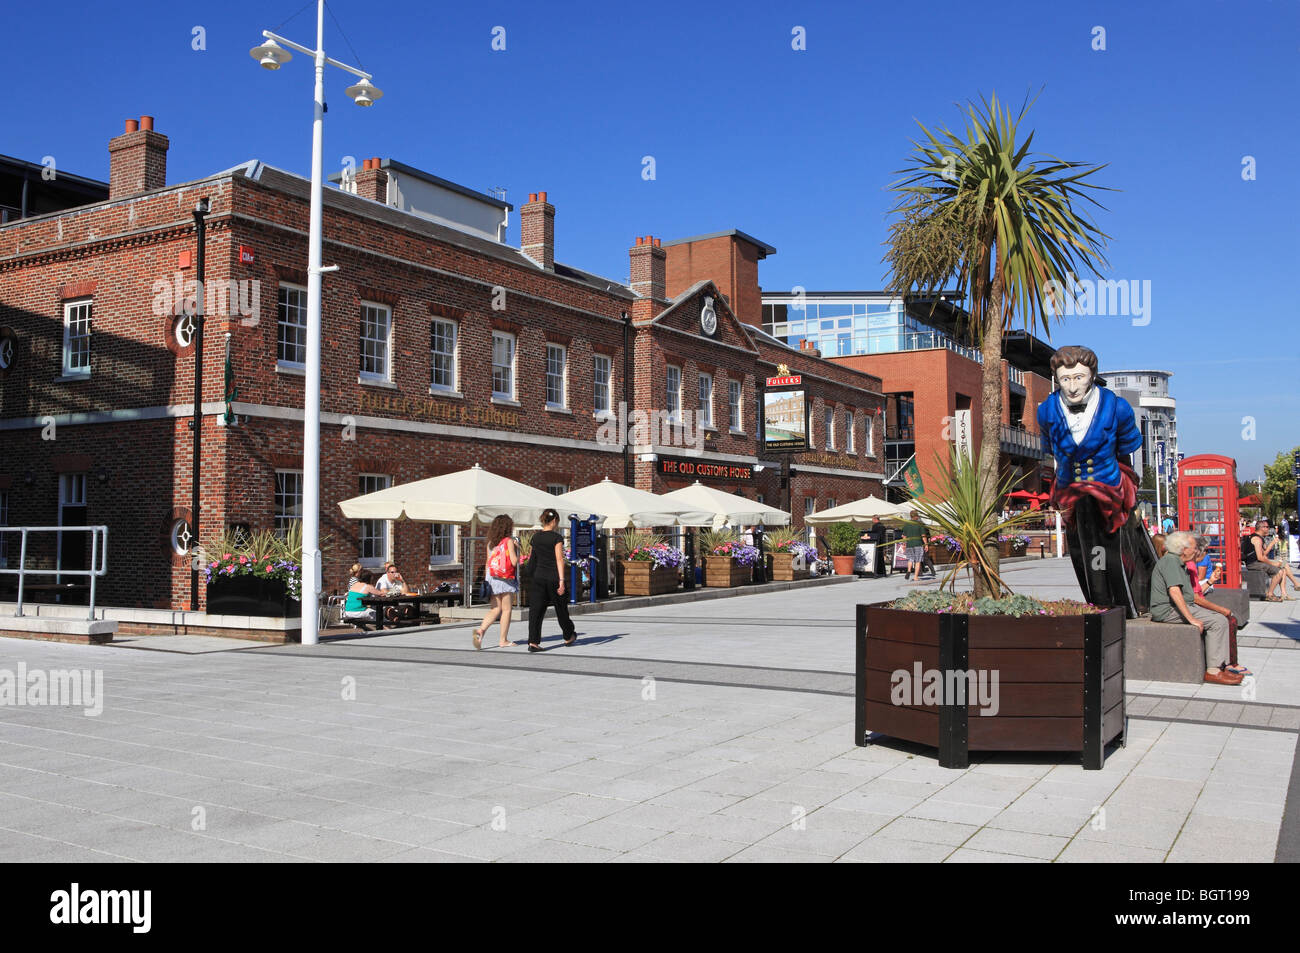 Portsmouth, Gunwharf Quays, Canalside, The Old Customs House Pub Stock Photo